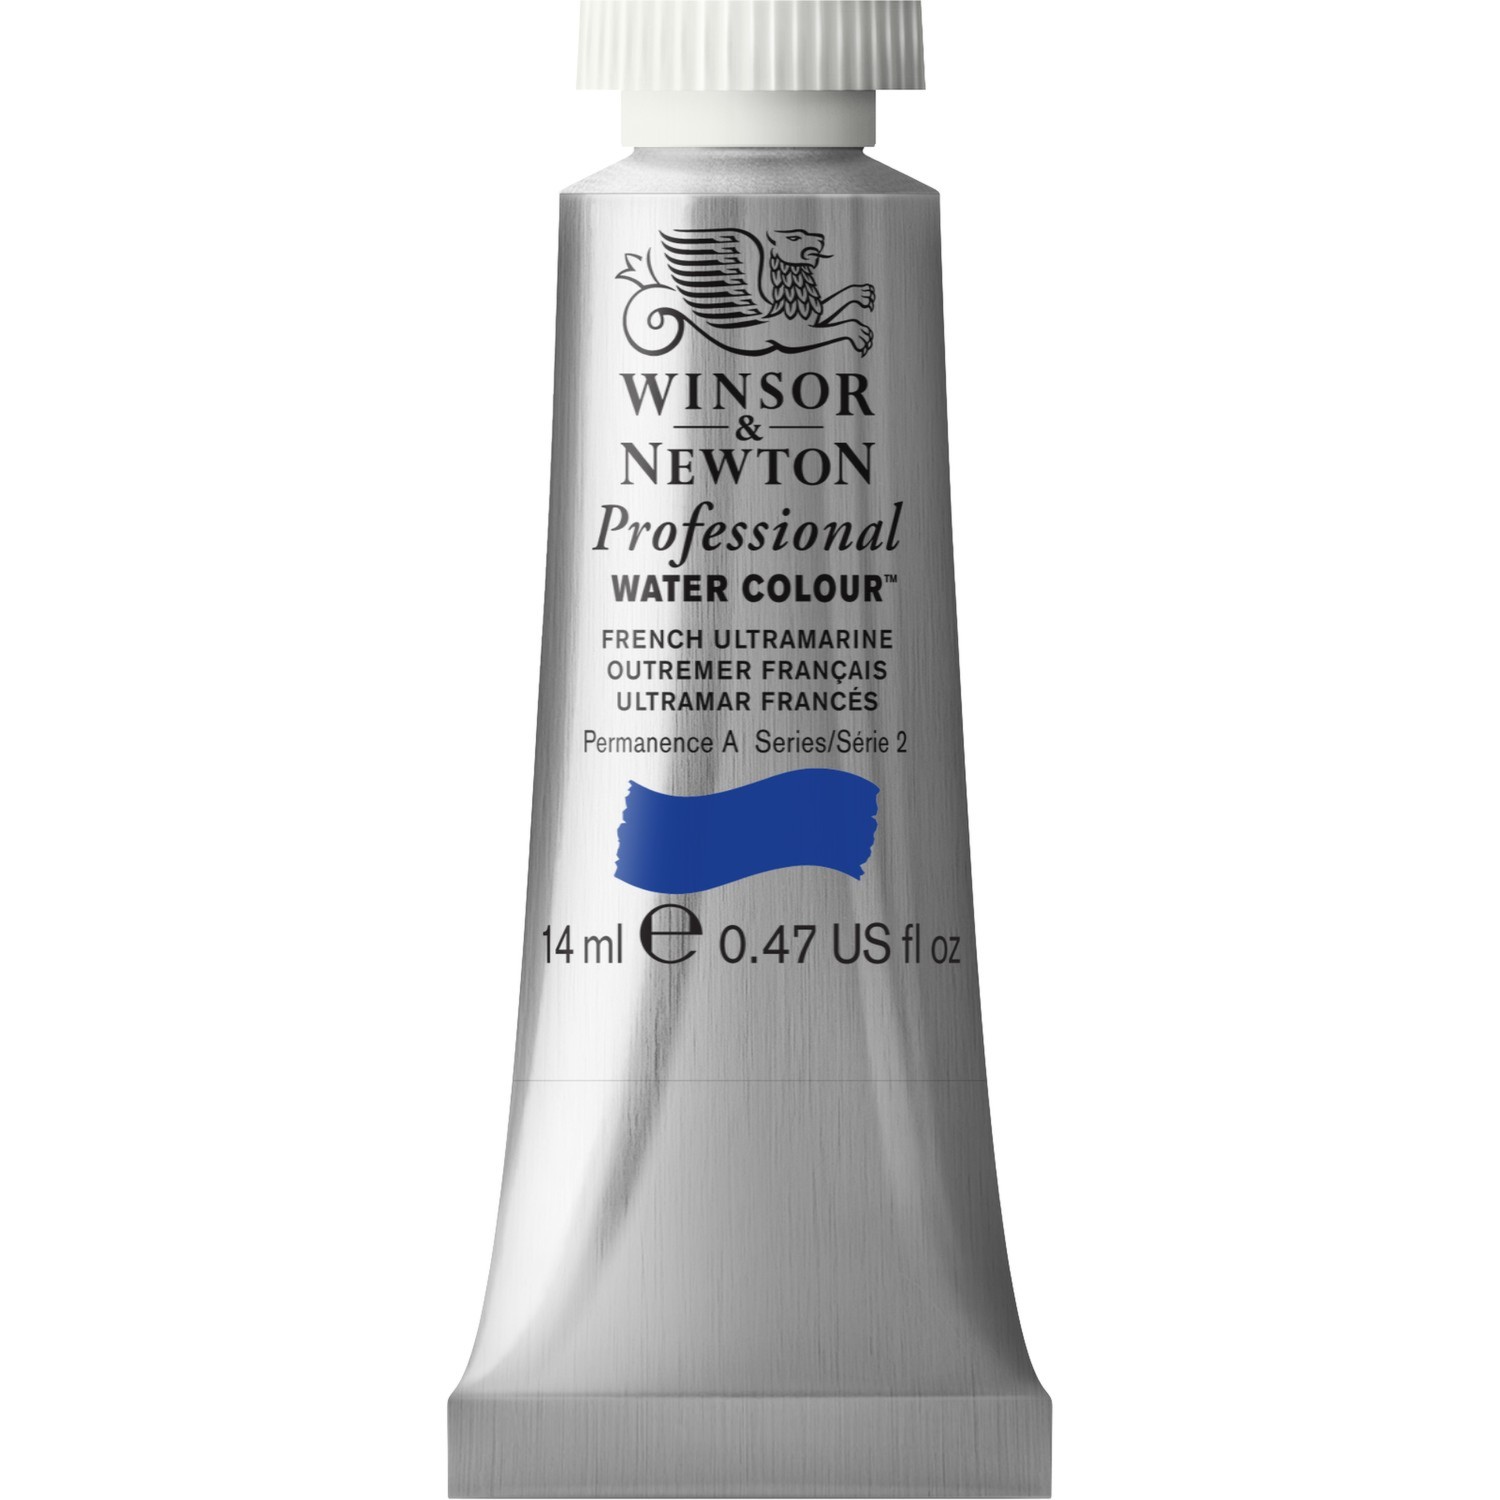 Winsor and Newton 14ml Professional Watercolour Paint - French Ultramarine Image 1